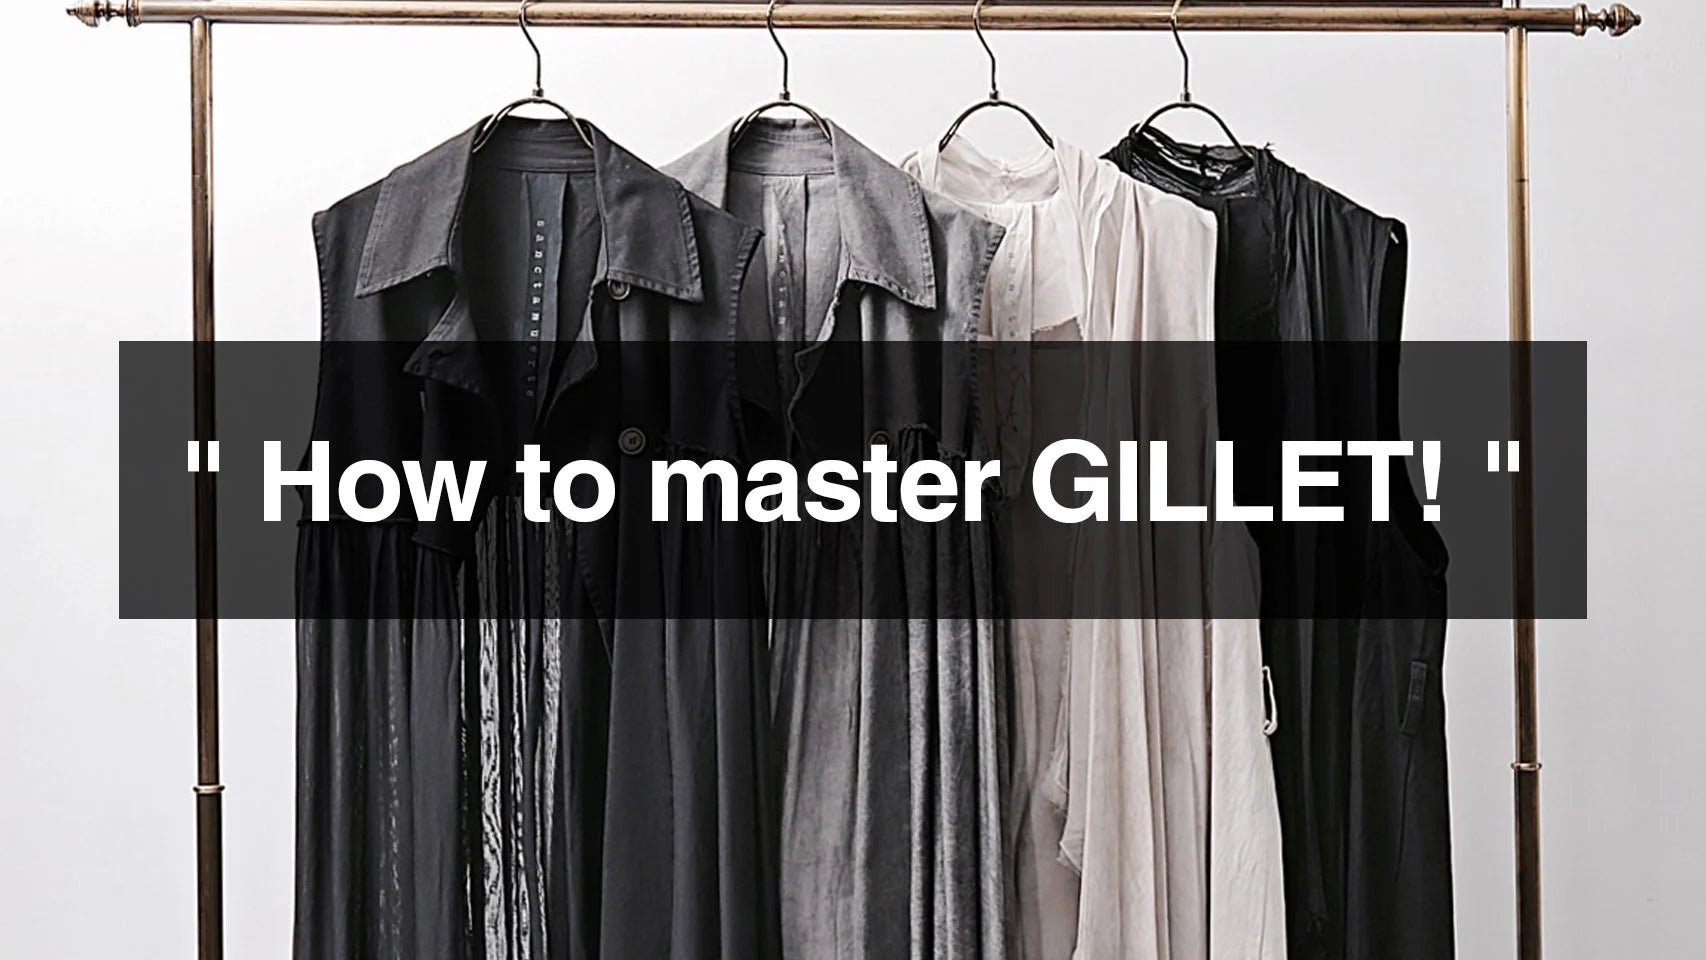 How to master GILLET!